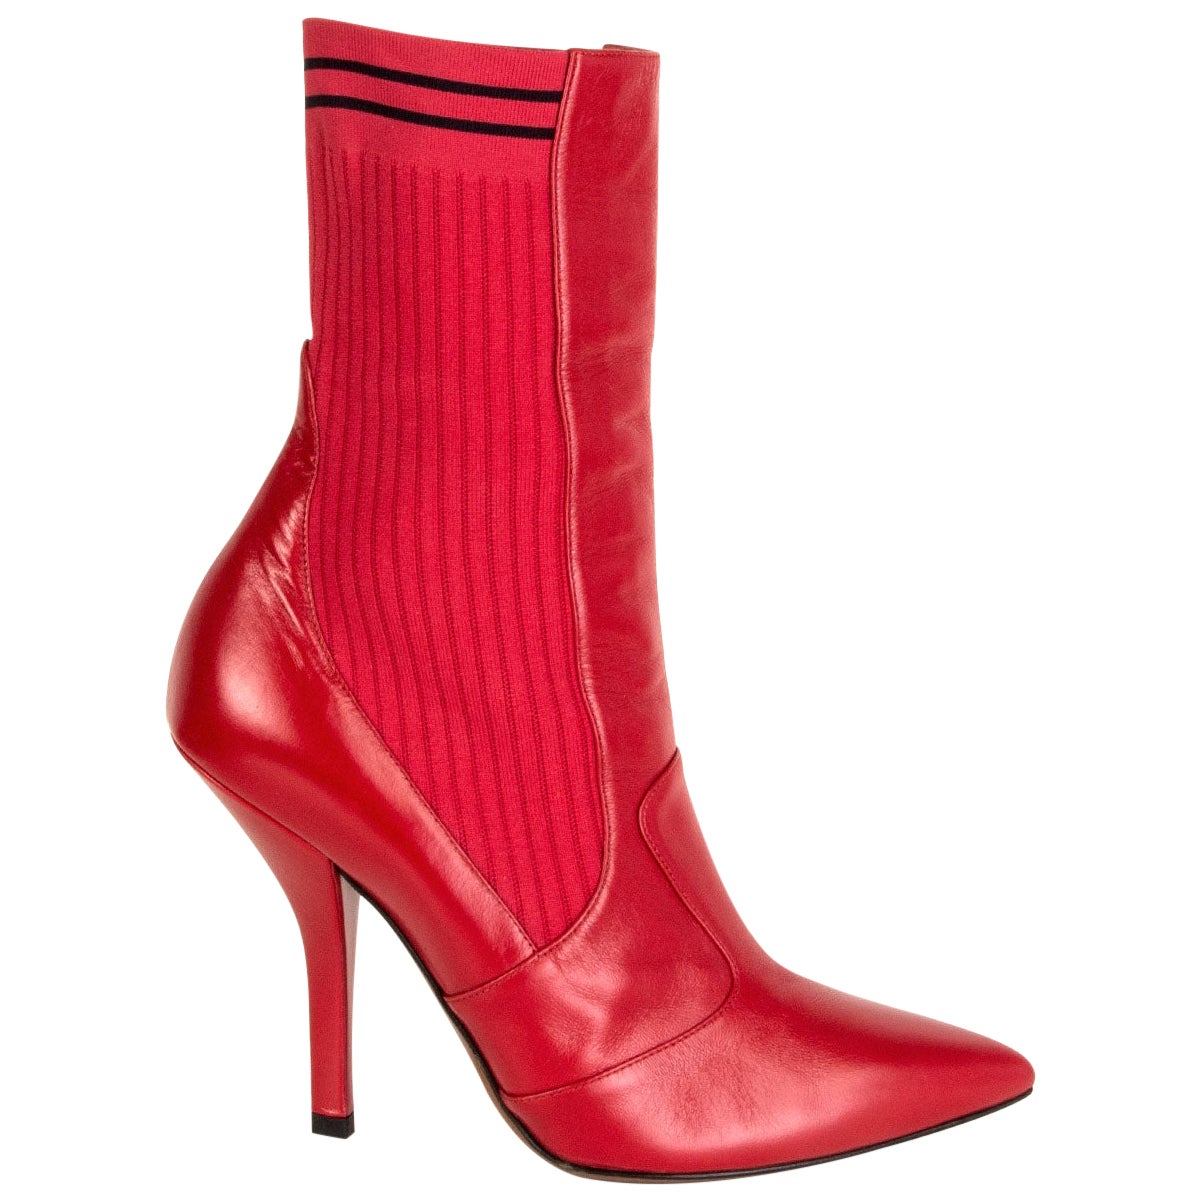 FENDI cherry red leather SOCK Ankle Boots Shoes 39